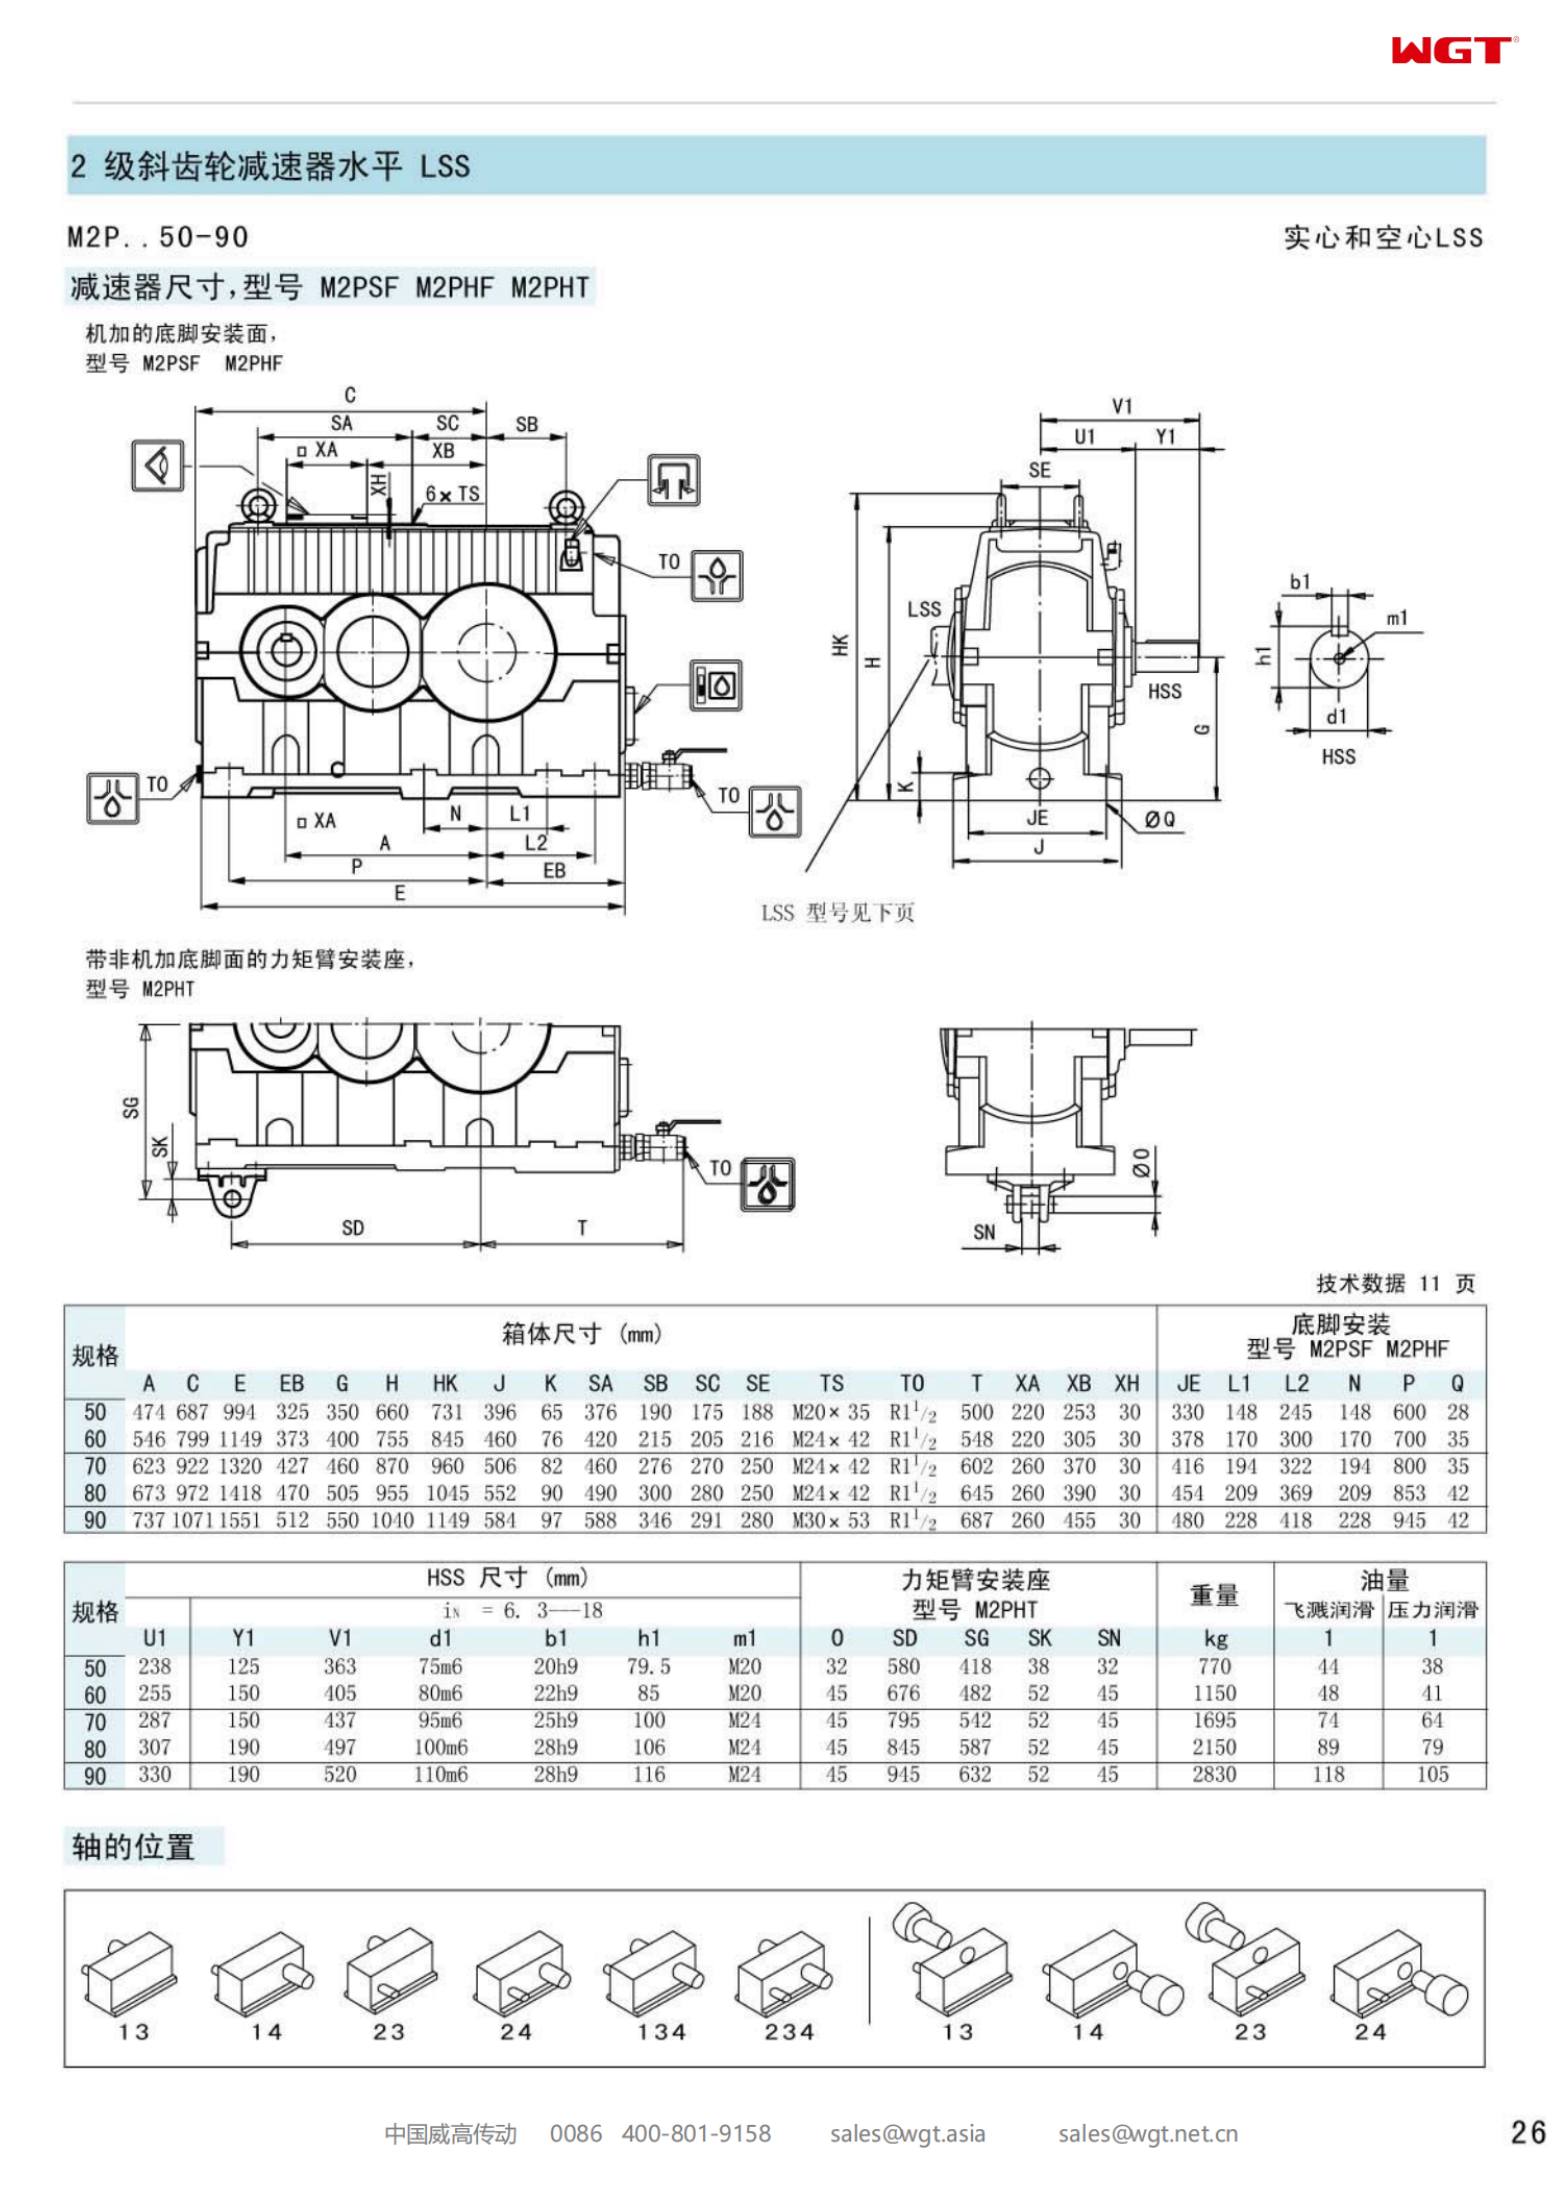 M2PHF60 Replace_SEW_M_Series Gearbox